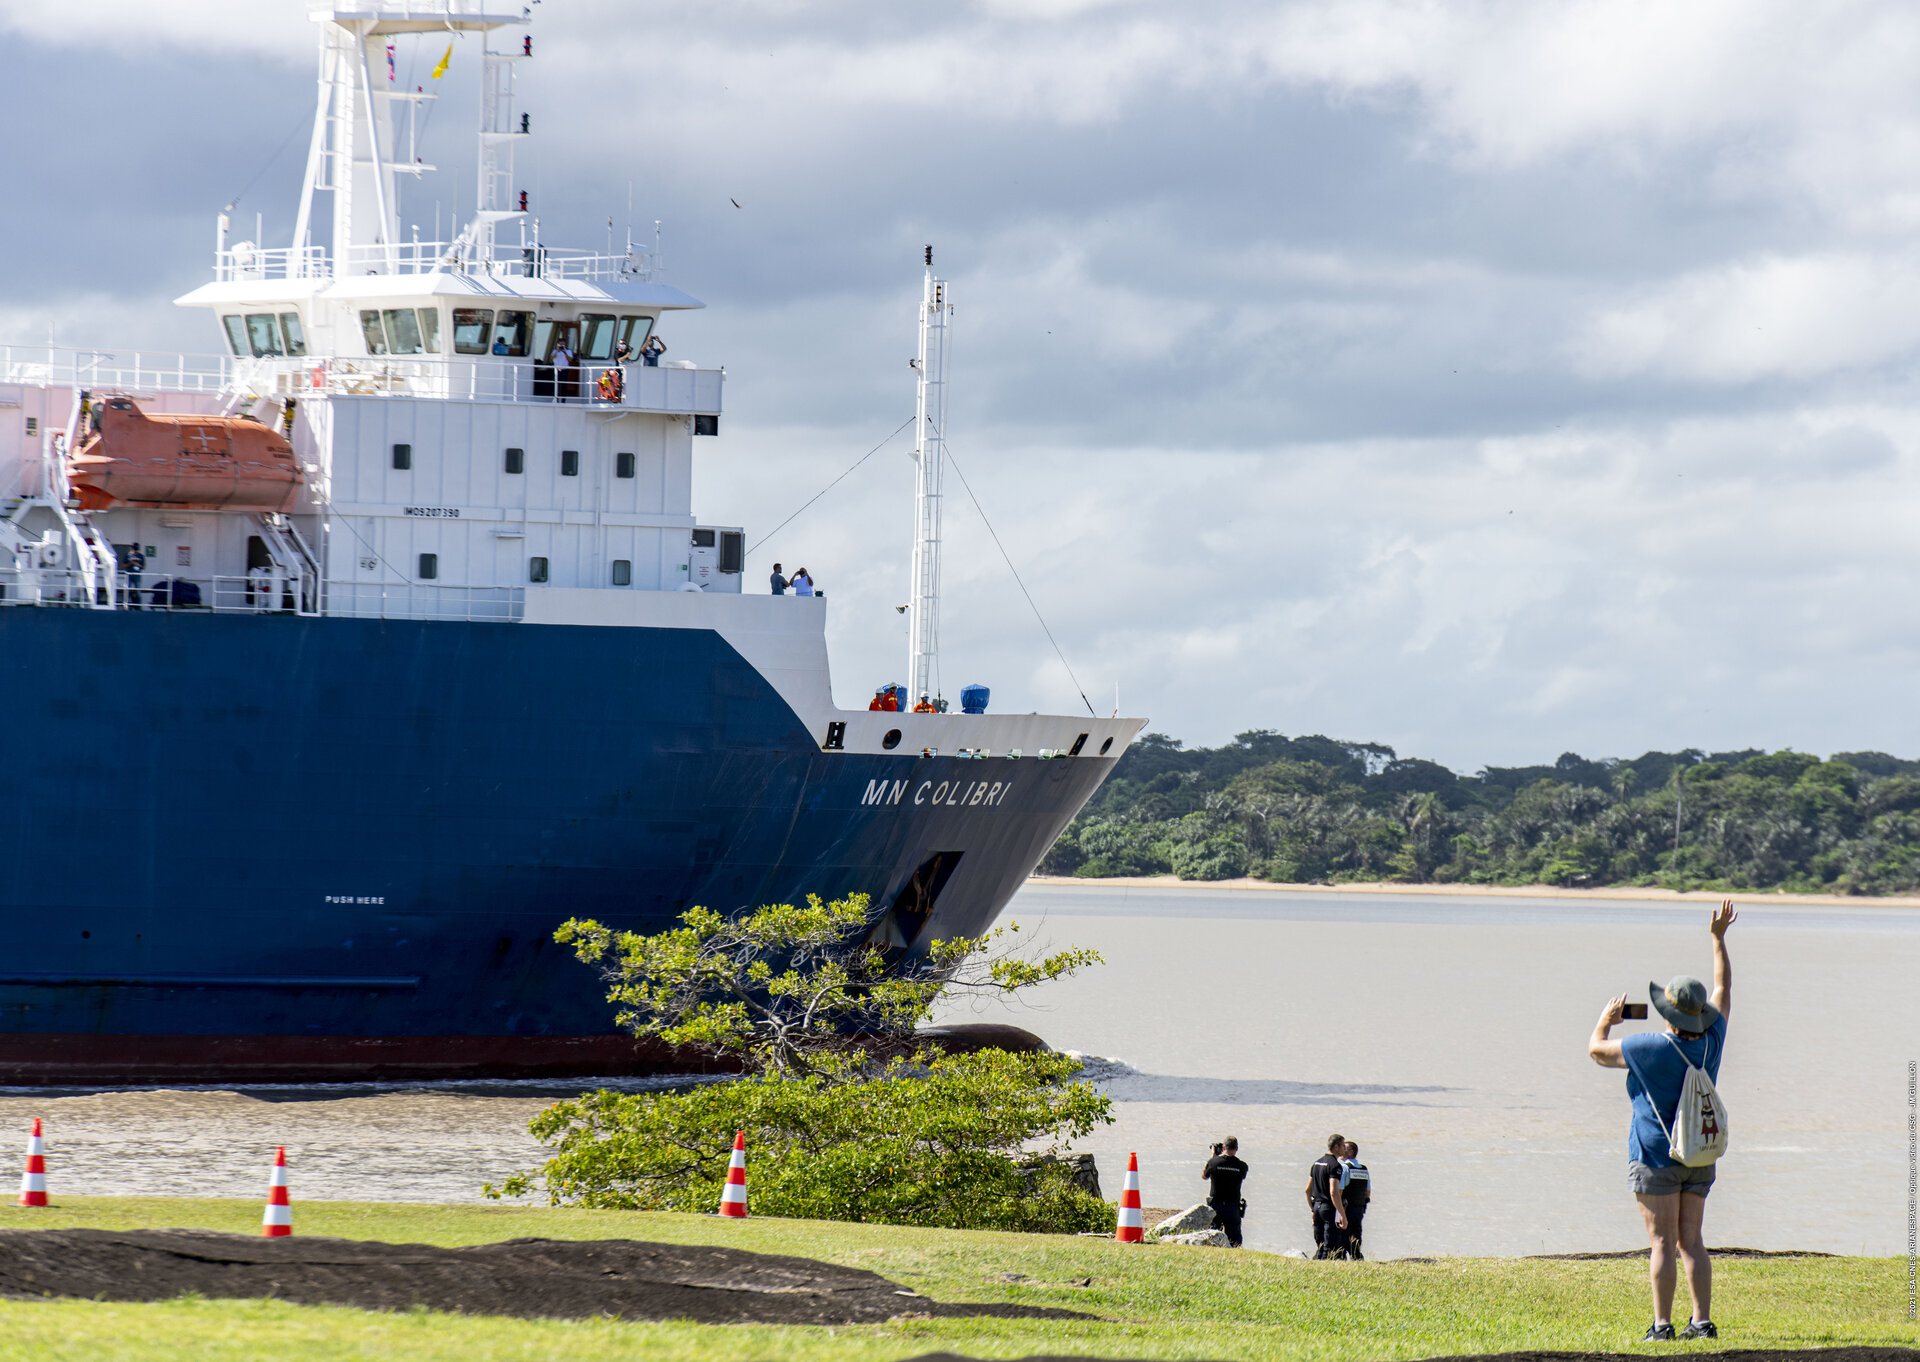 The James Webb Space Telescope has arrived safely at Pariacabo harbour in French Guiana